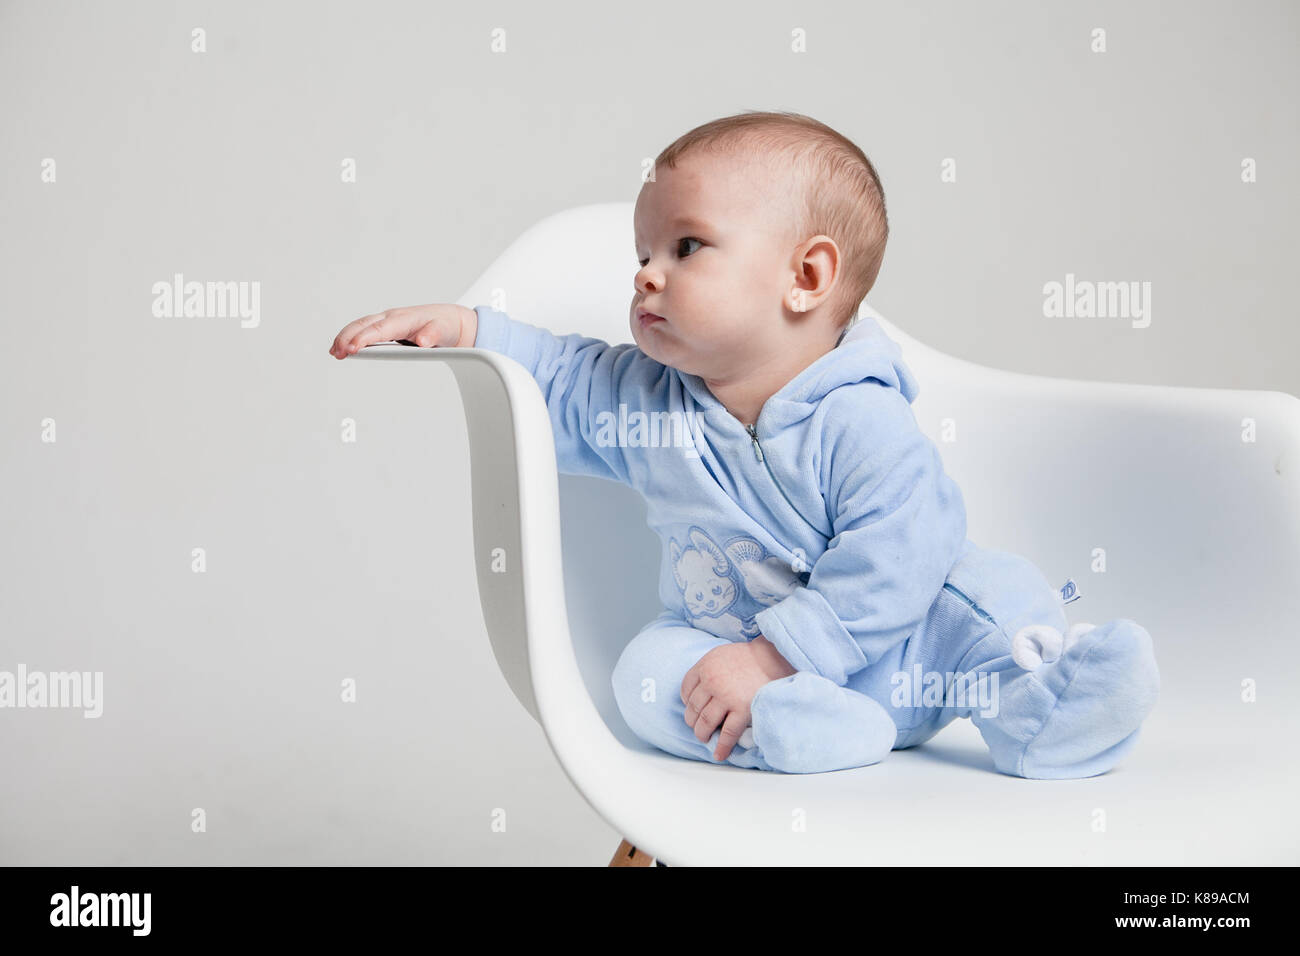 little boy one year old sitting on chair studio portrait white background Stock Photo